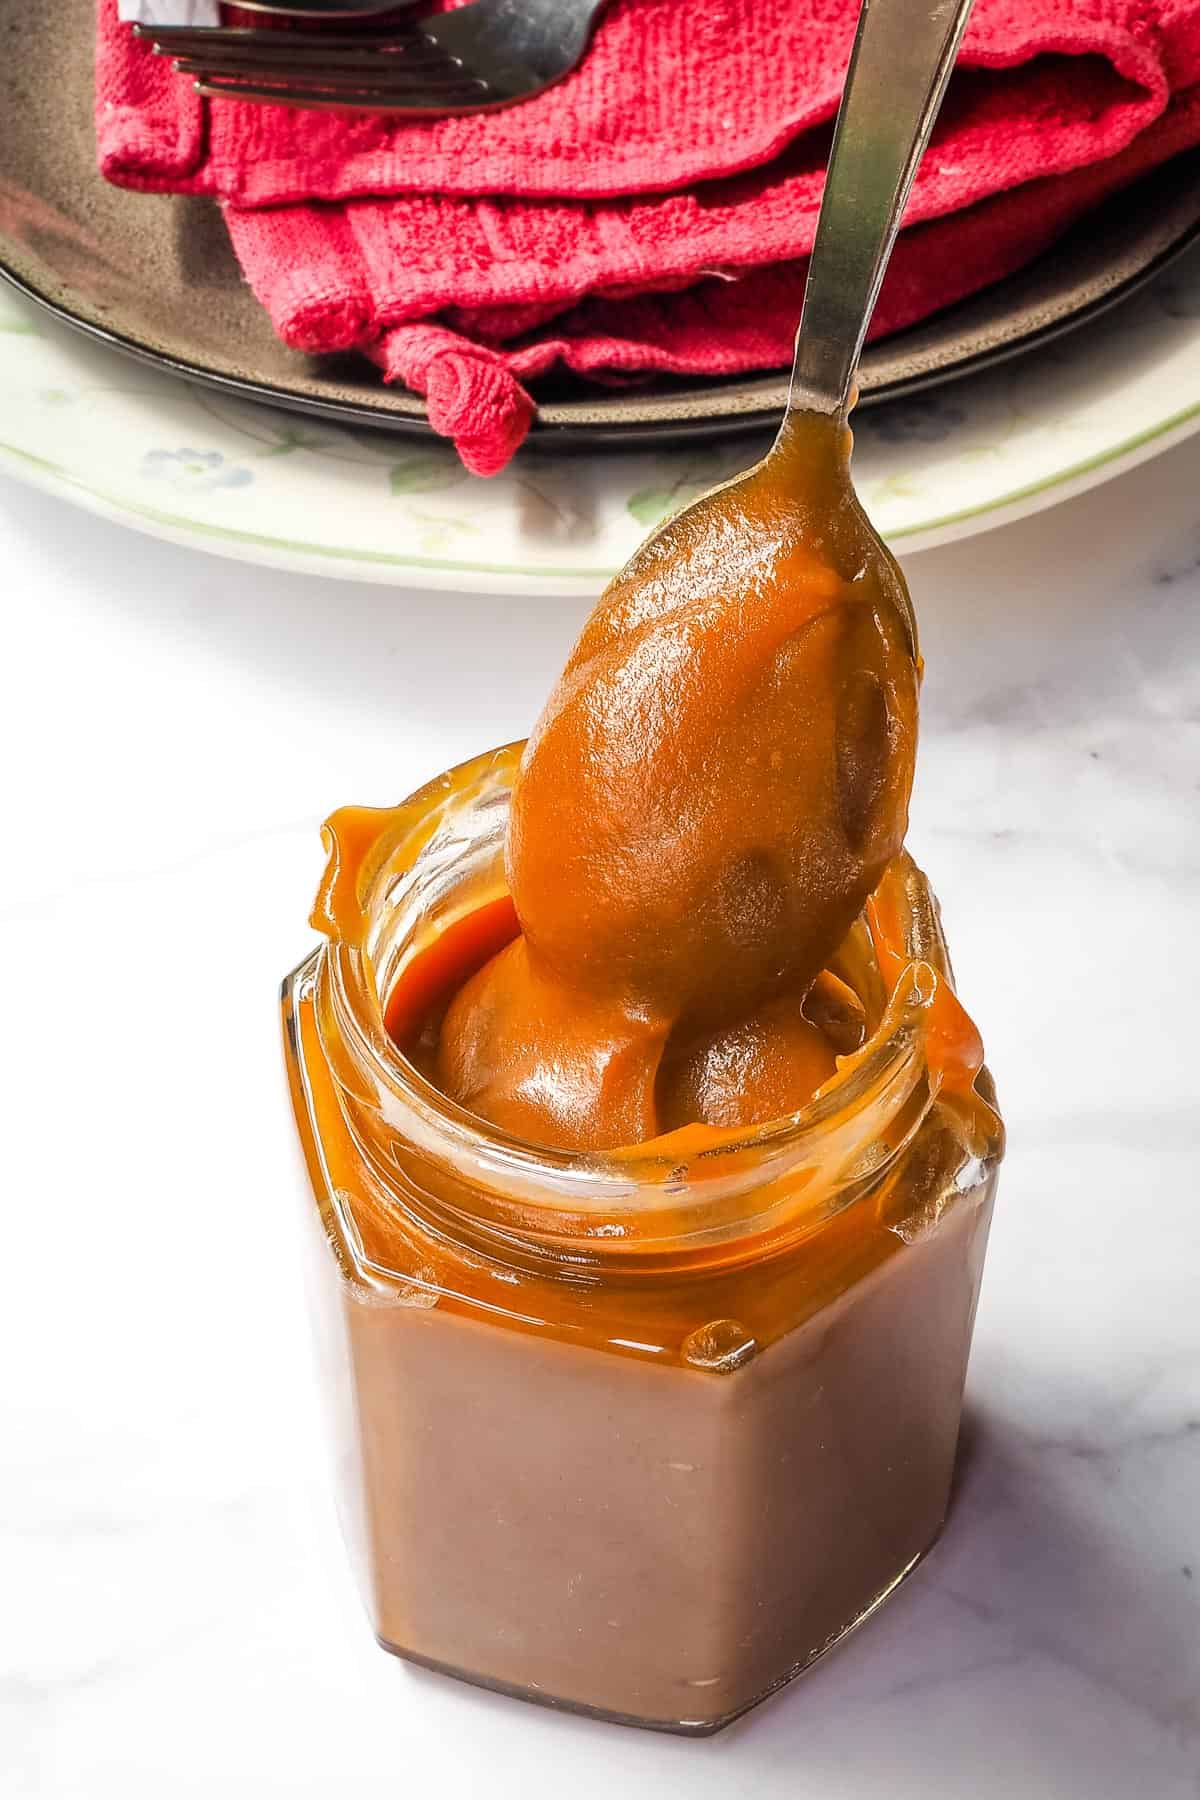 A spoon of salted caramel lifted up from a glass jar.